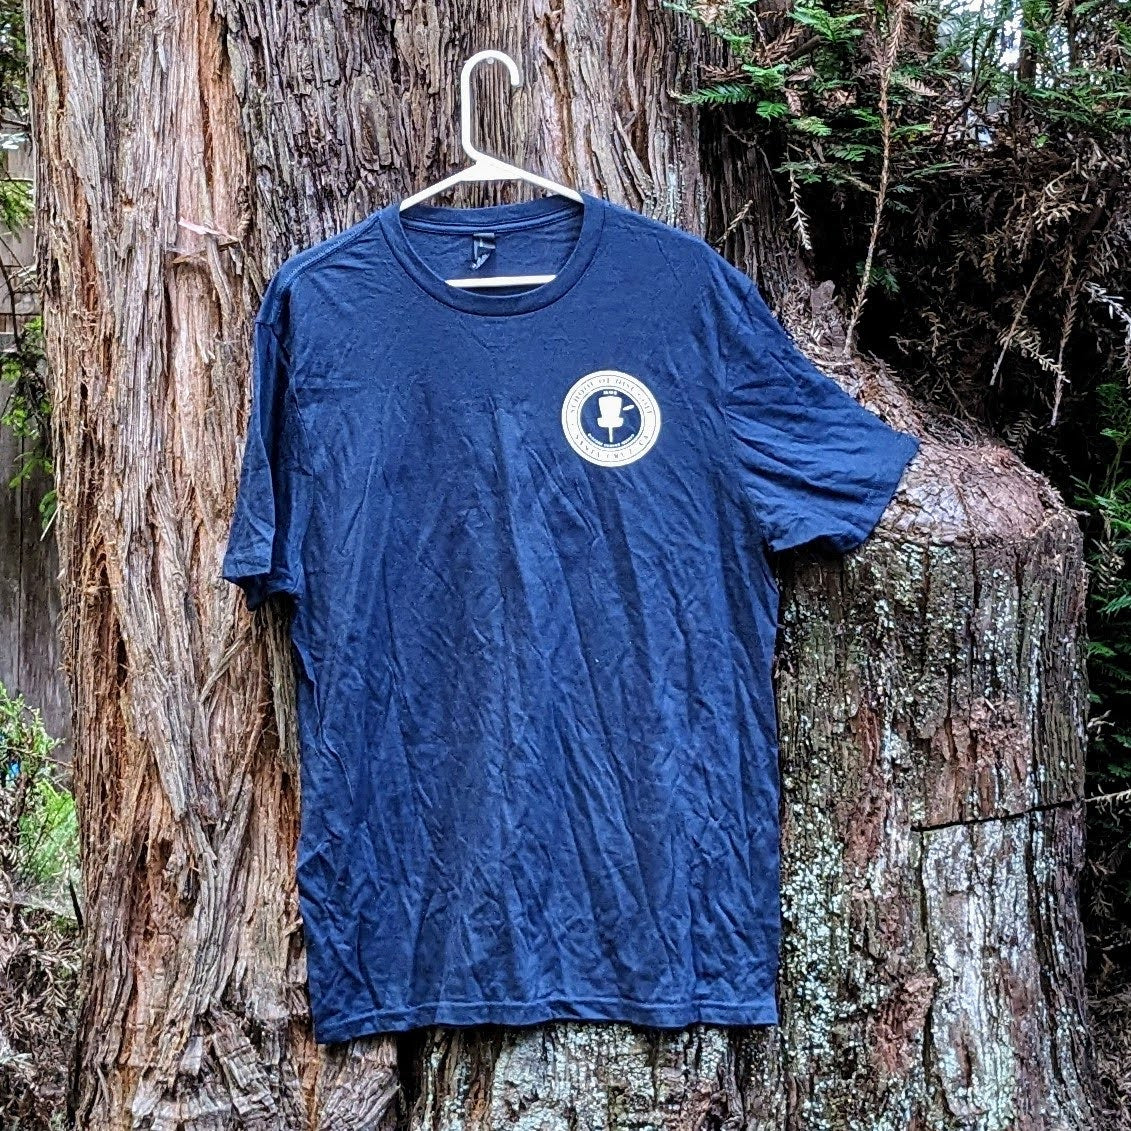 Clearance- Navy Tee with School of white School of Disc Golf logo, size XL